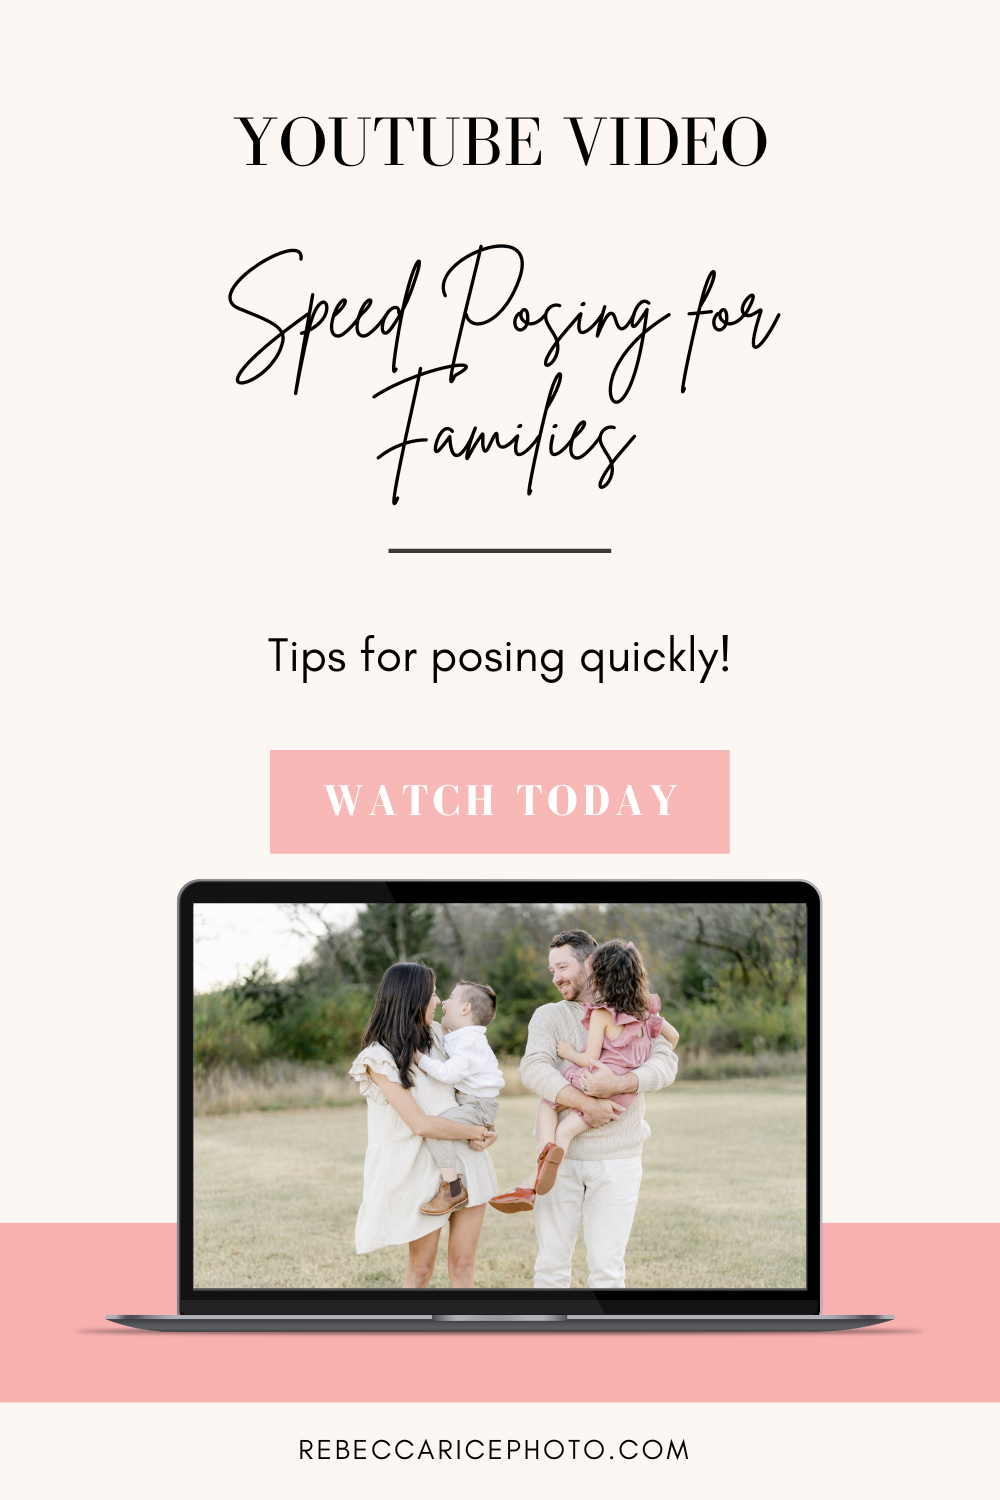 Speed Posing for Families (Tips for posing quickly!) | Family Posing Tips